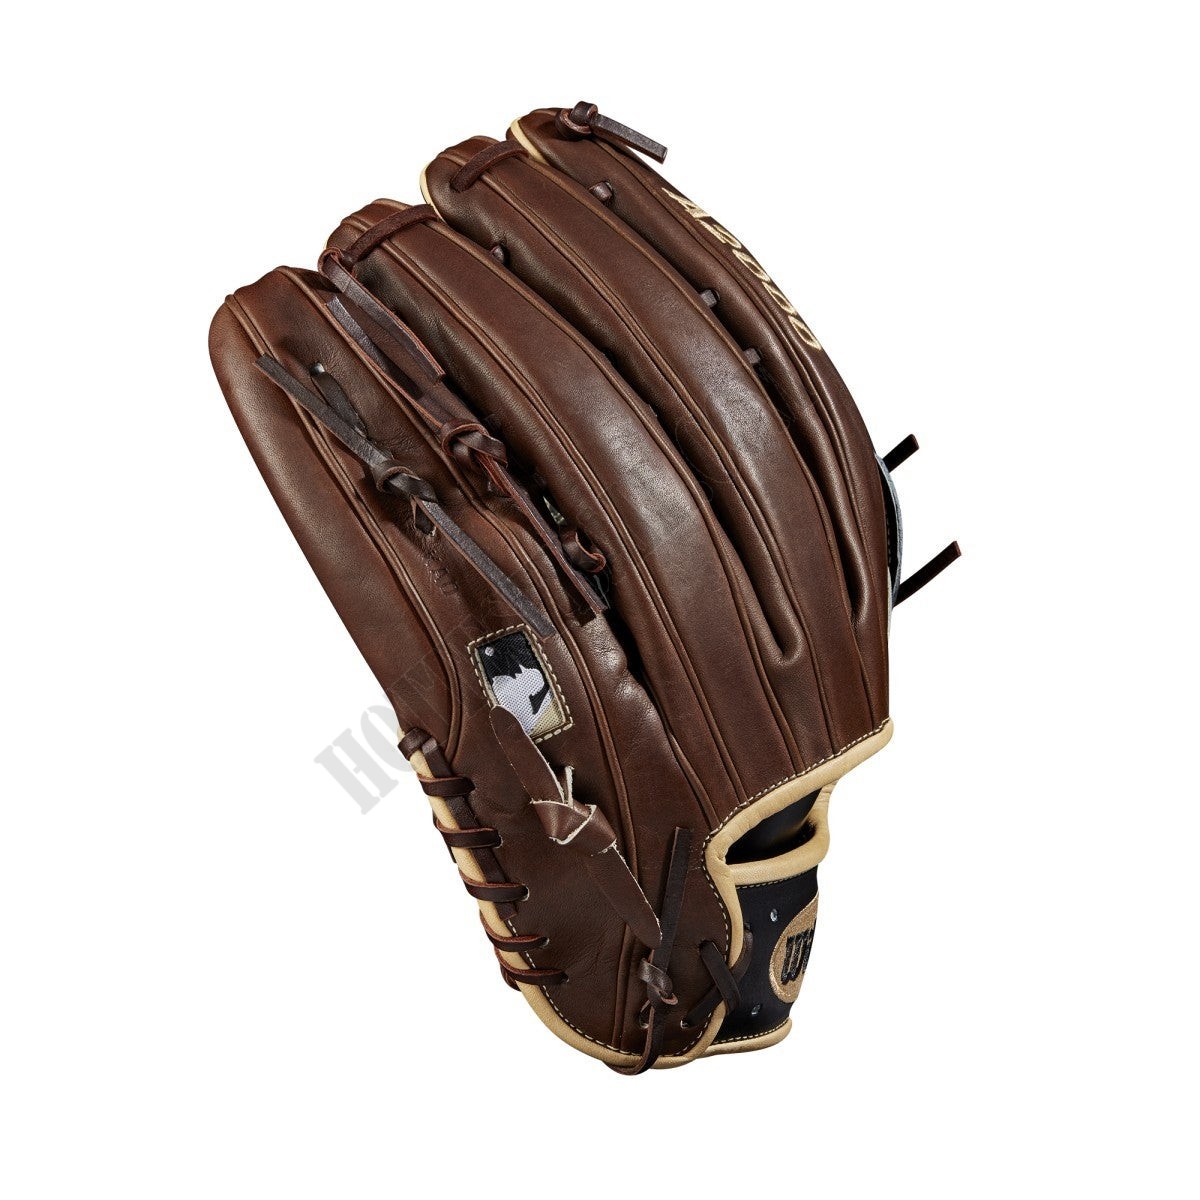 2020 A2000 1799 12.75" Outfield Baseball Glove ● Wilson Promotions - -4